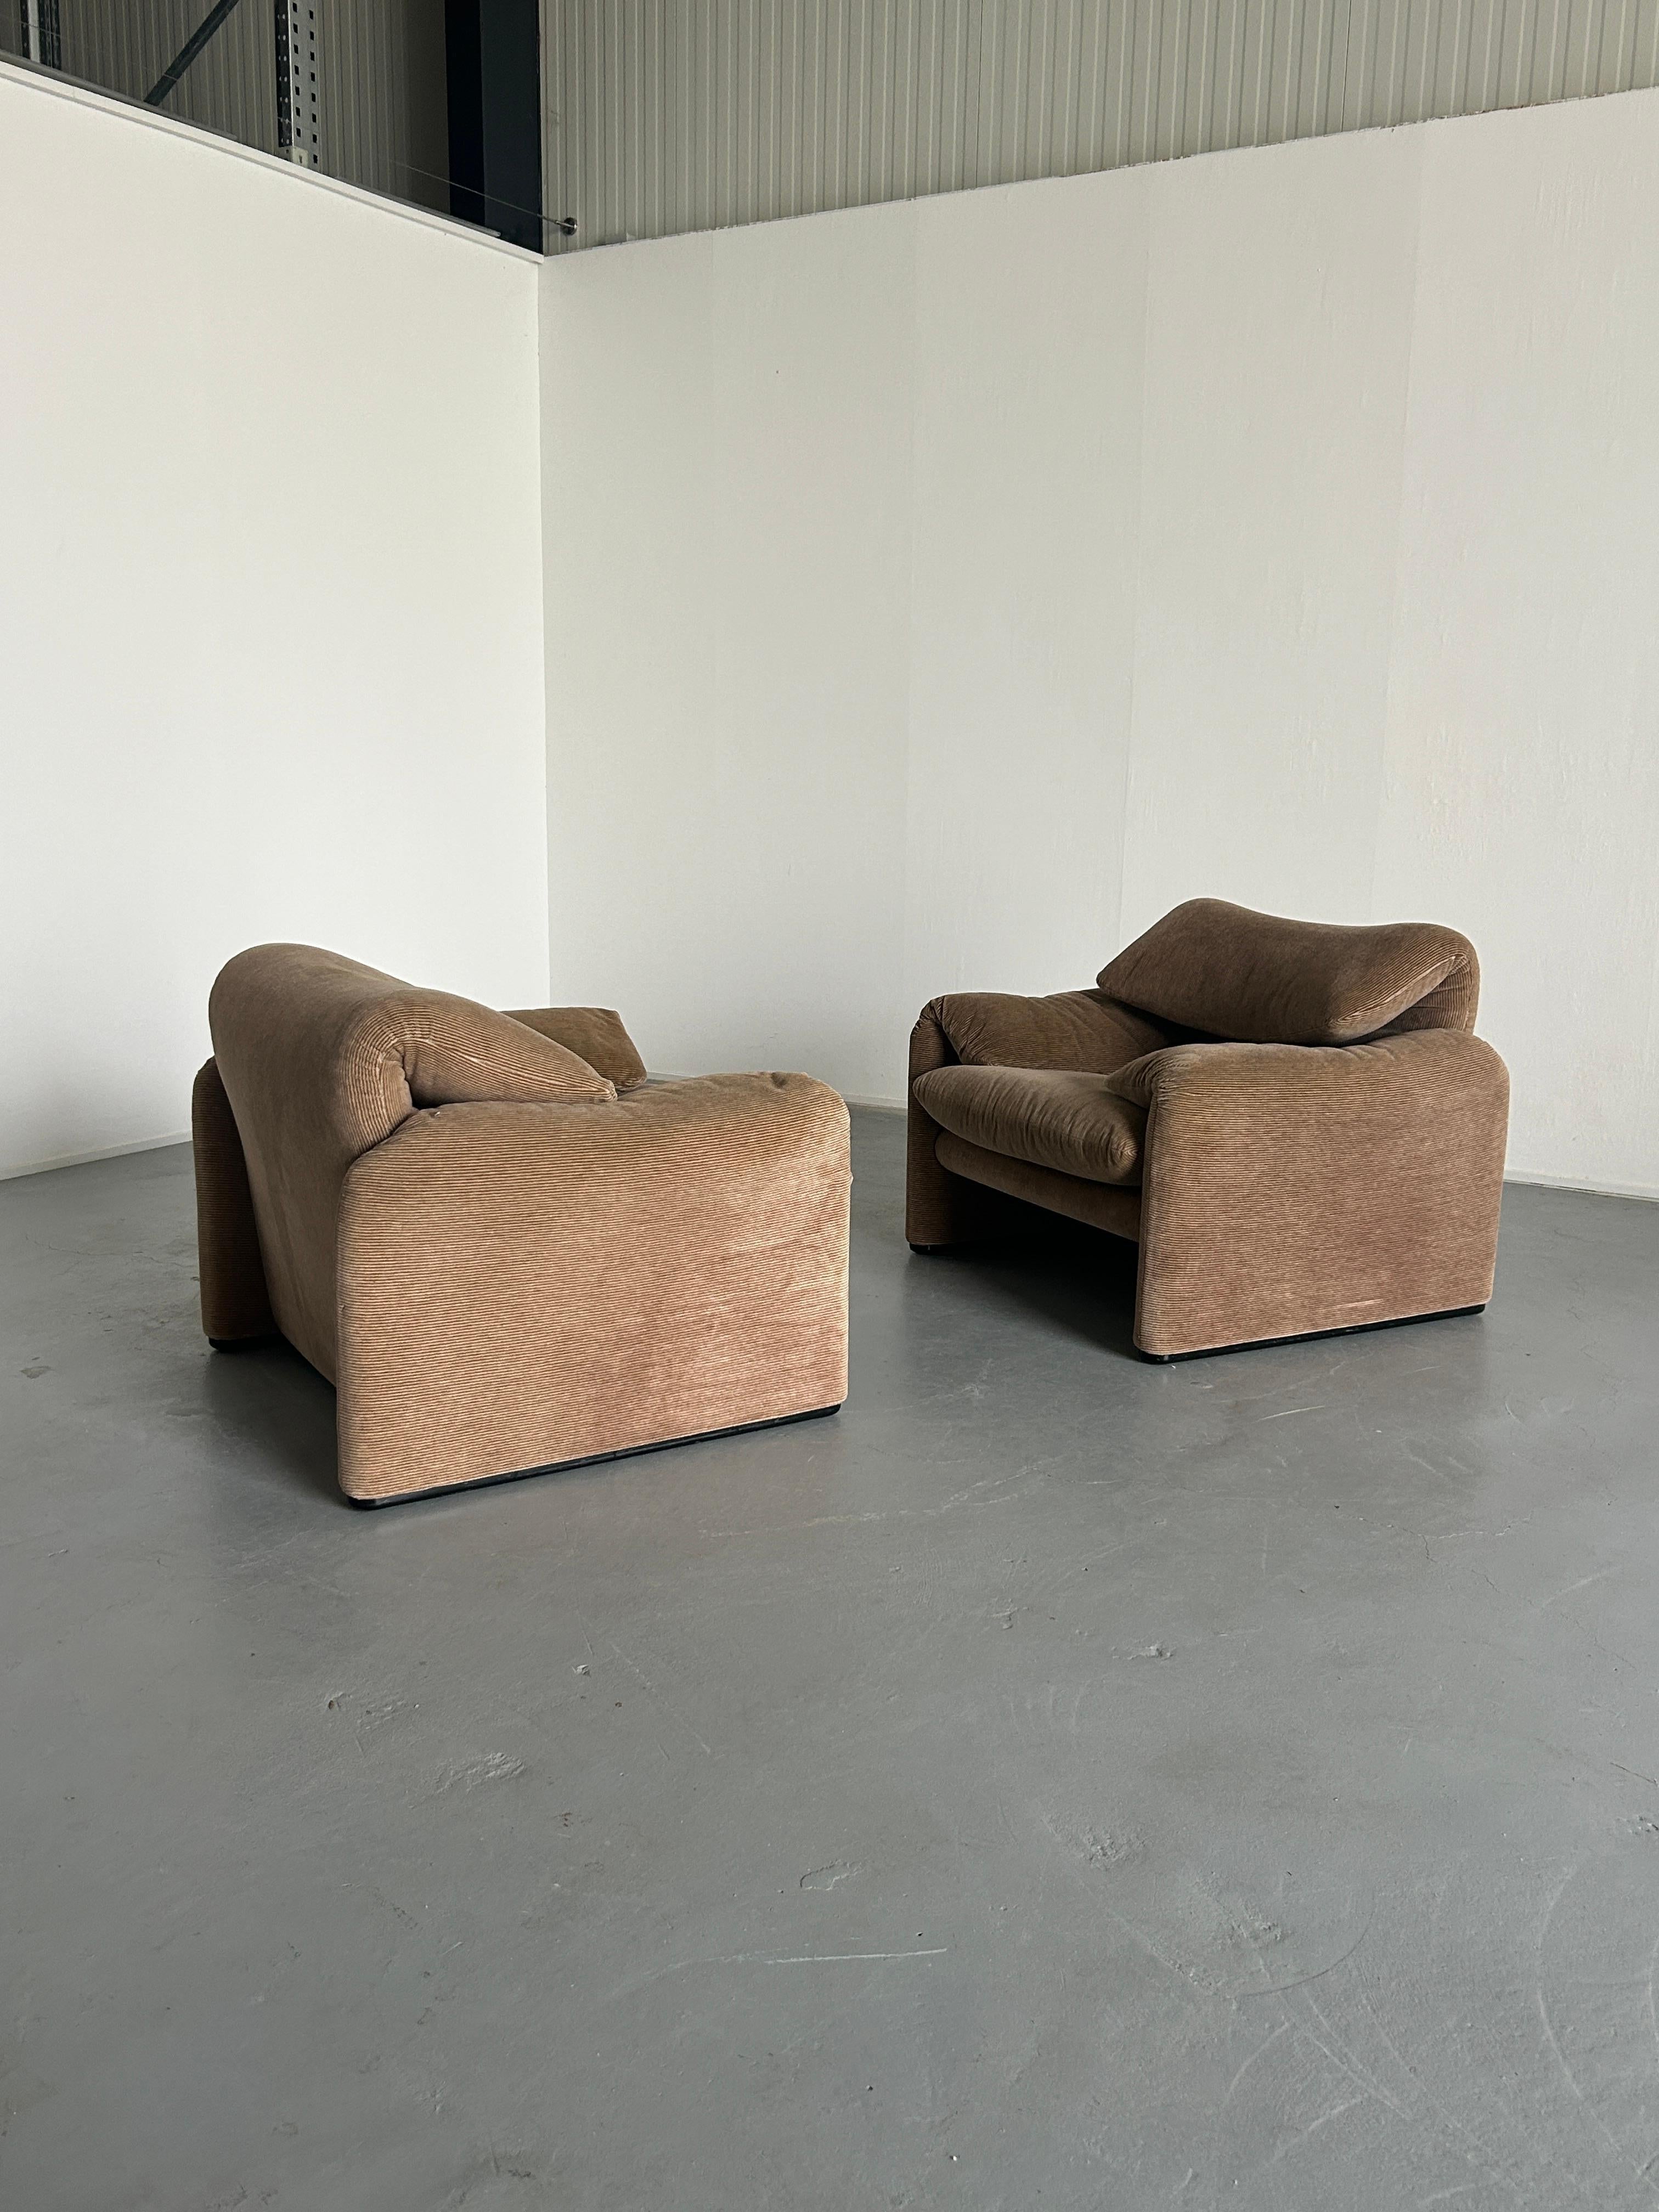 Late 20th Century Pair of Vintage 'Maralunga' Armchairs by Vico Magistretti for Cassina, 1970s